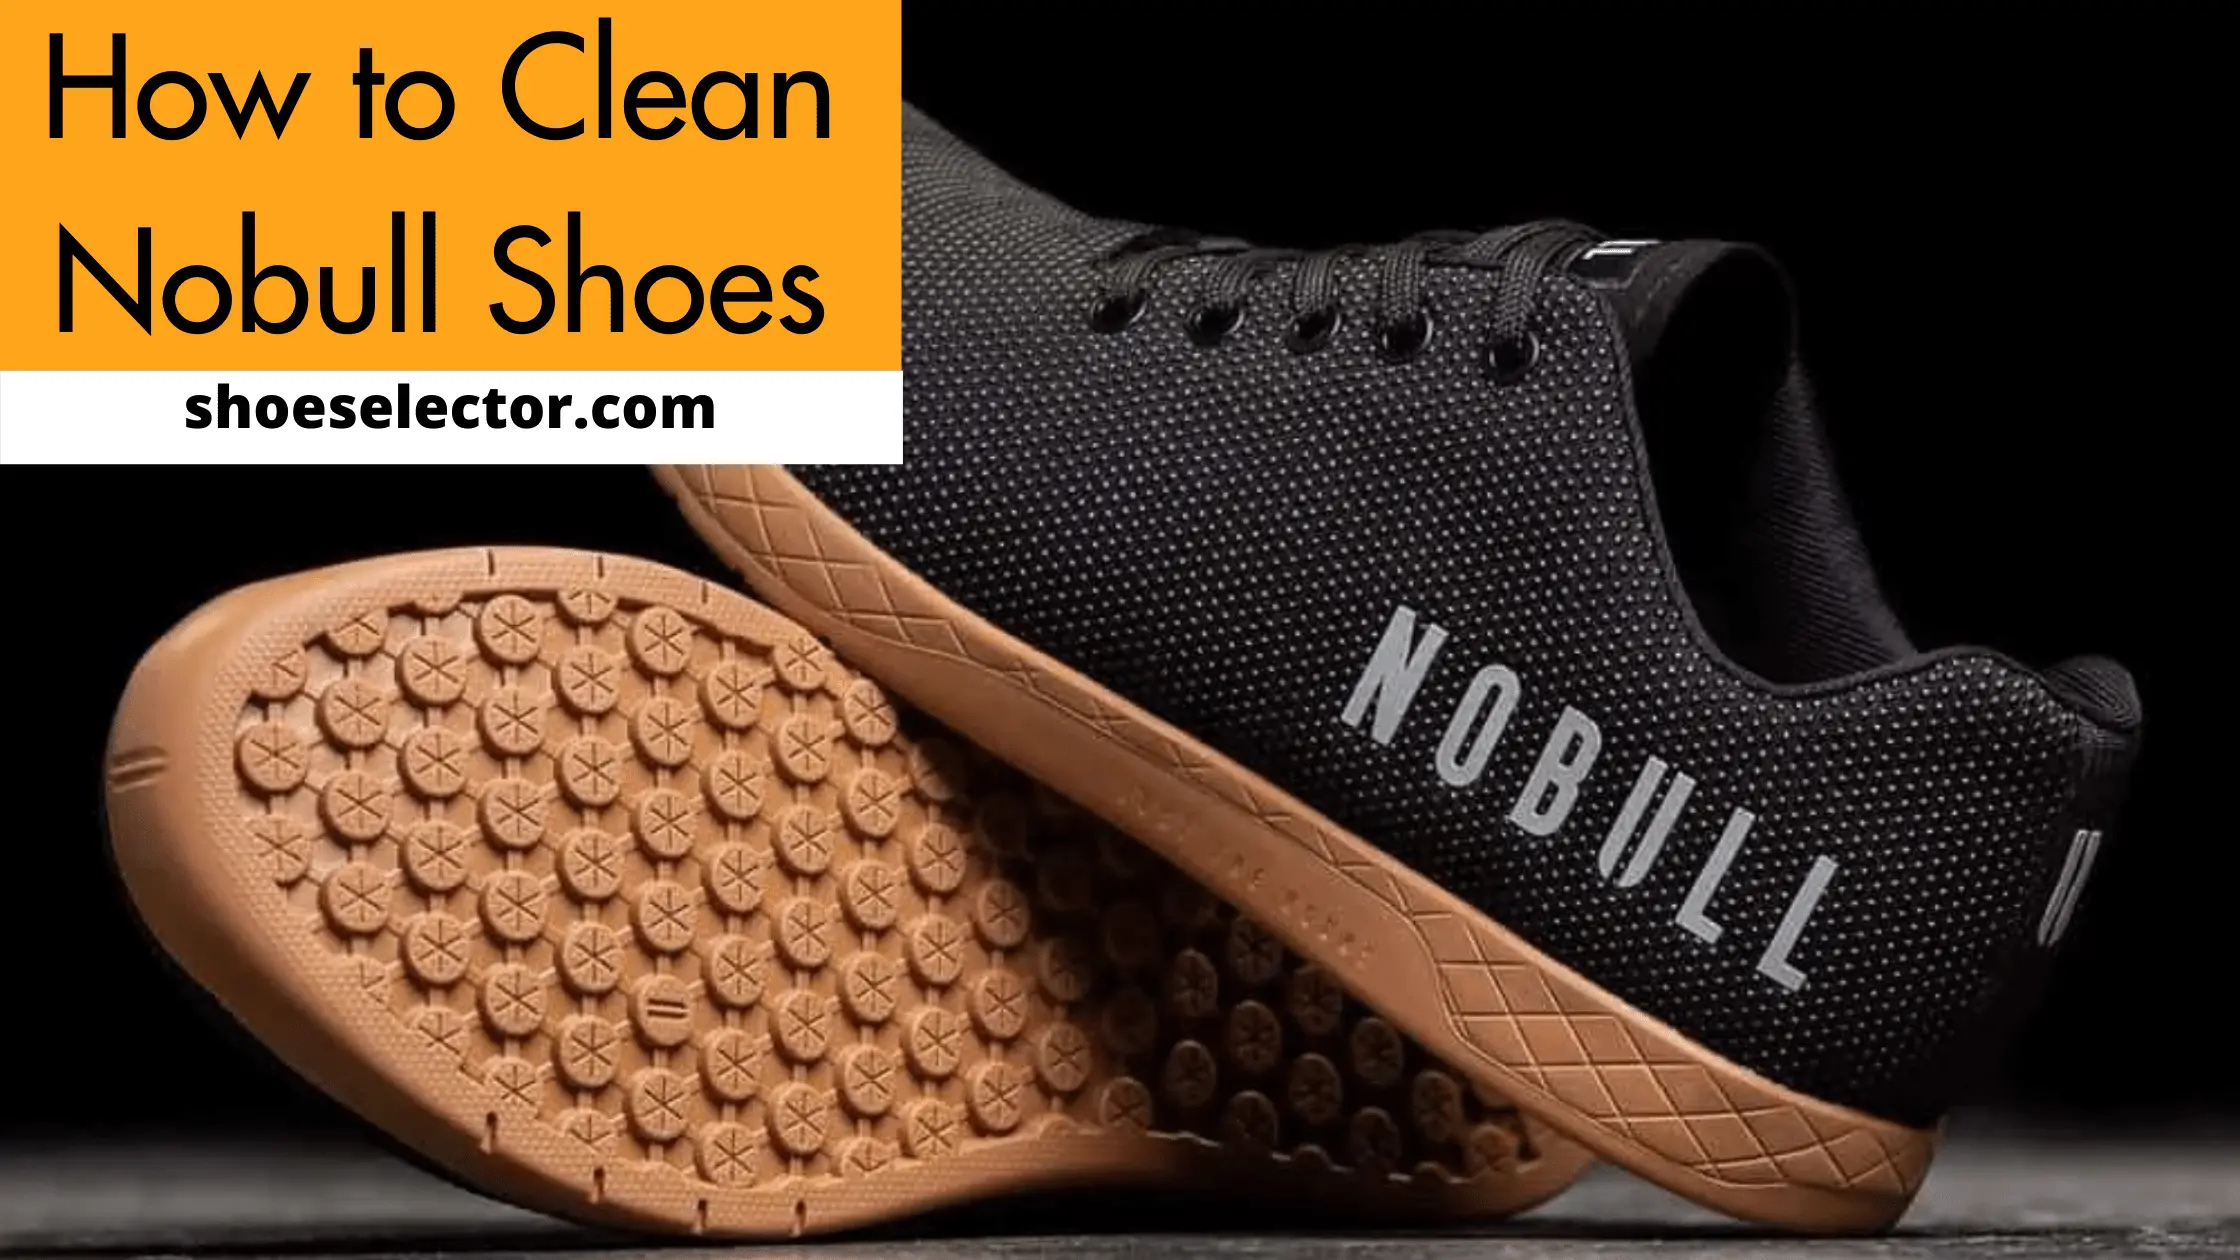 How to Clean Nobull Shoes? - Simple Guide